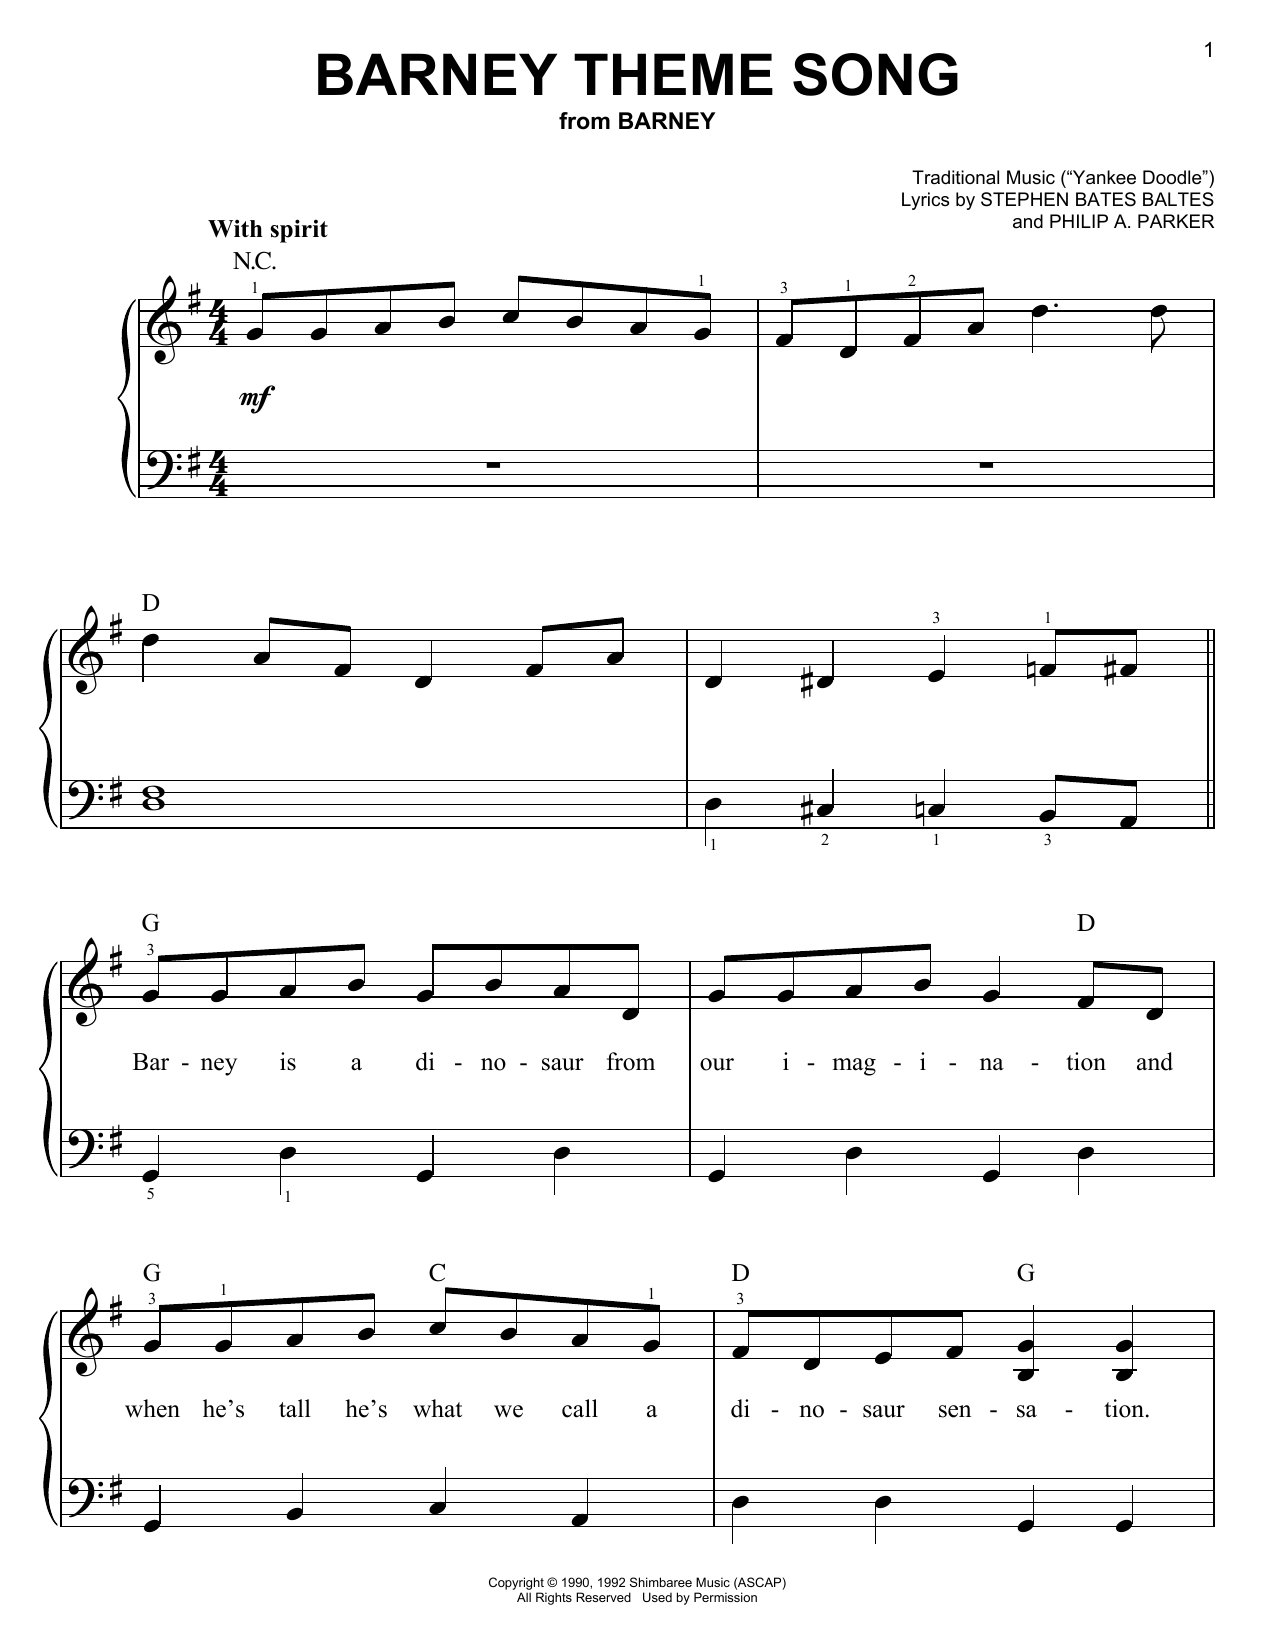 Download Stephen Bates Baltes and Philip A. P Barney Theme Song (from Barney) Sheet Music